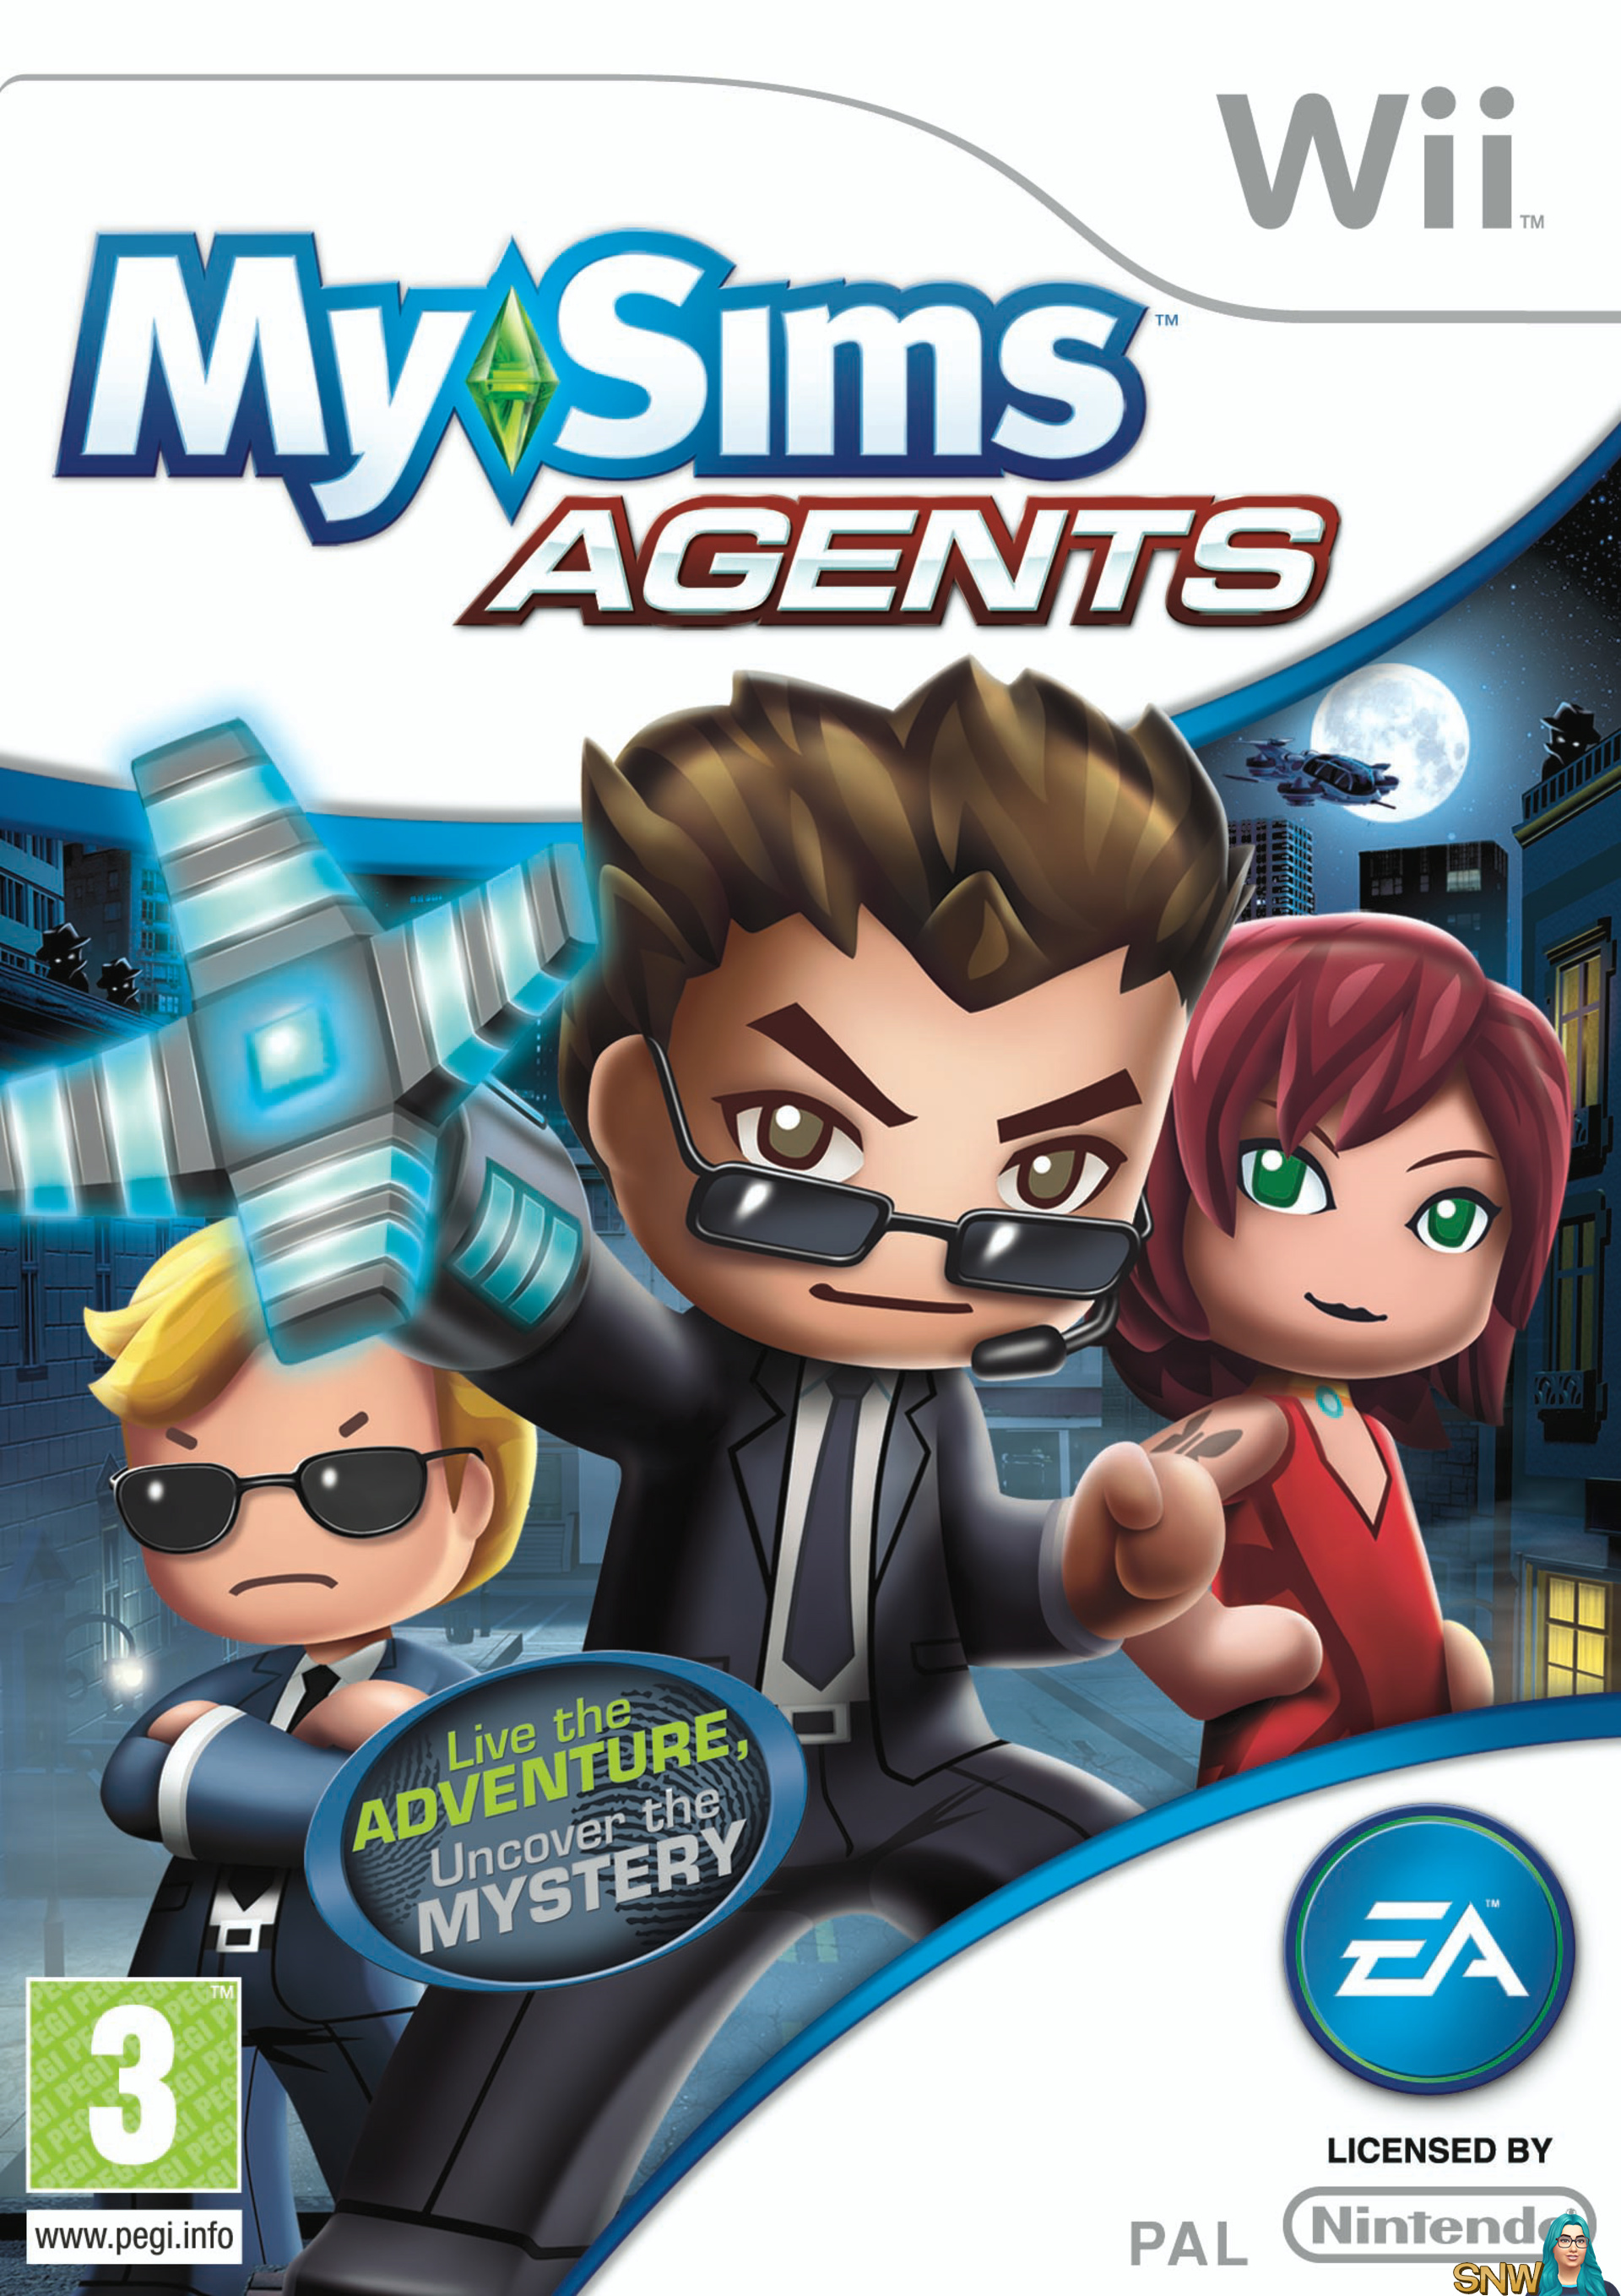 mysims-agents-wii-snw-simsnetwork